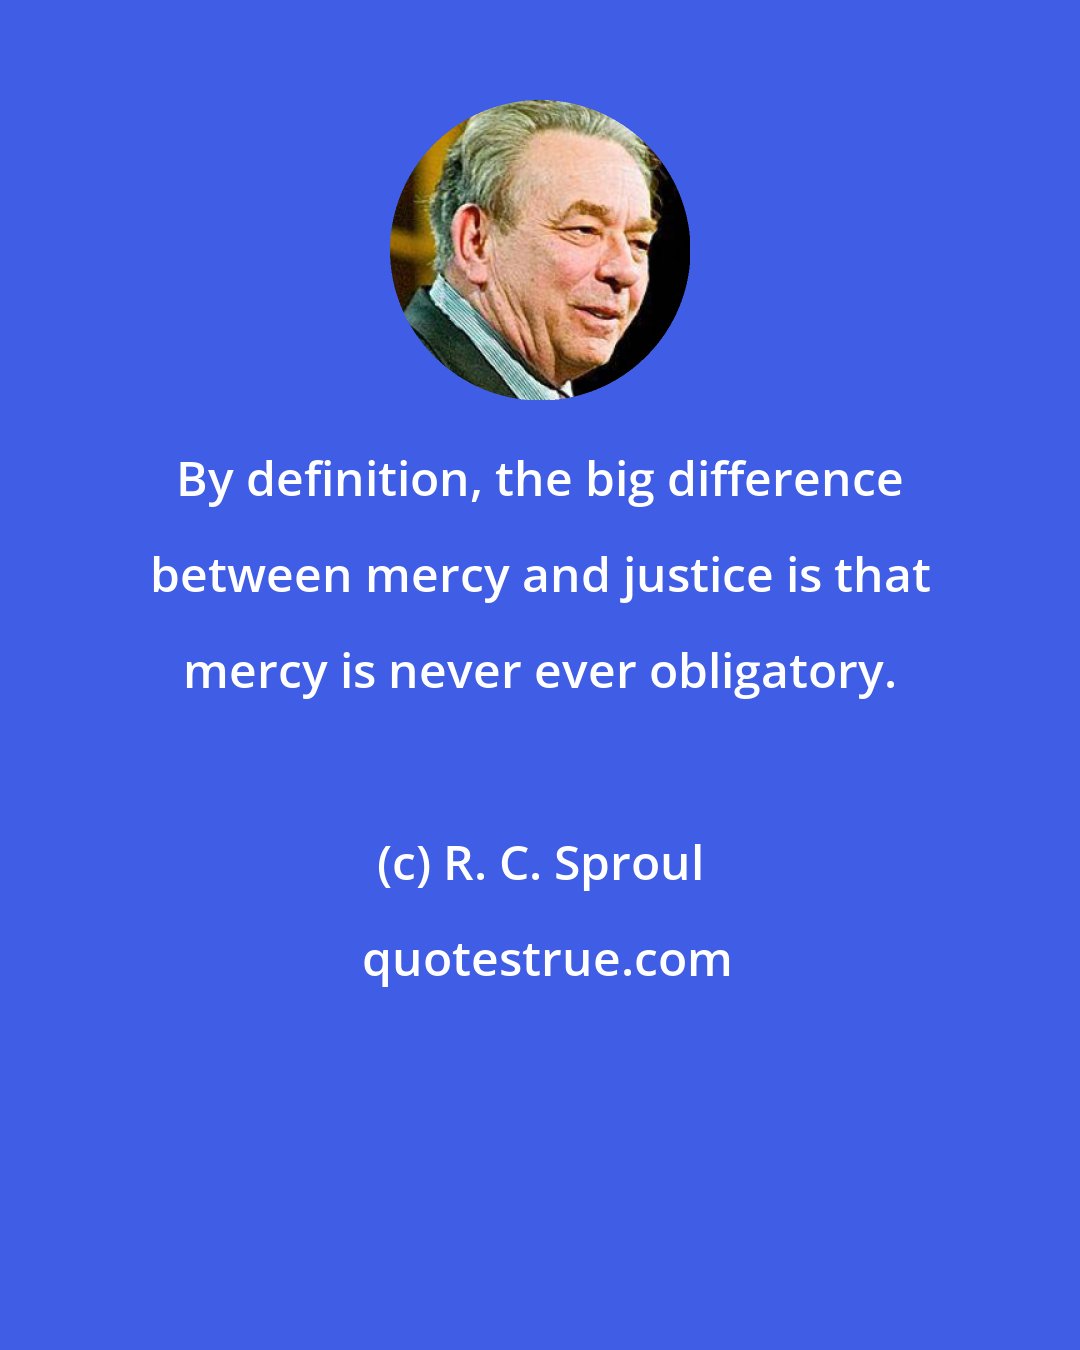 R. C. Sproul: By definition, the big difference between mercy and justice is that mercy is never ever obligatory.